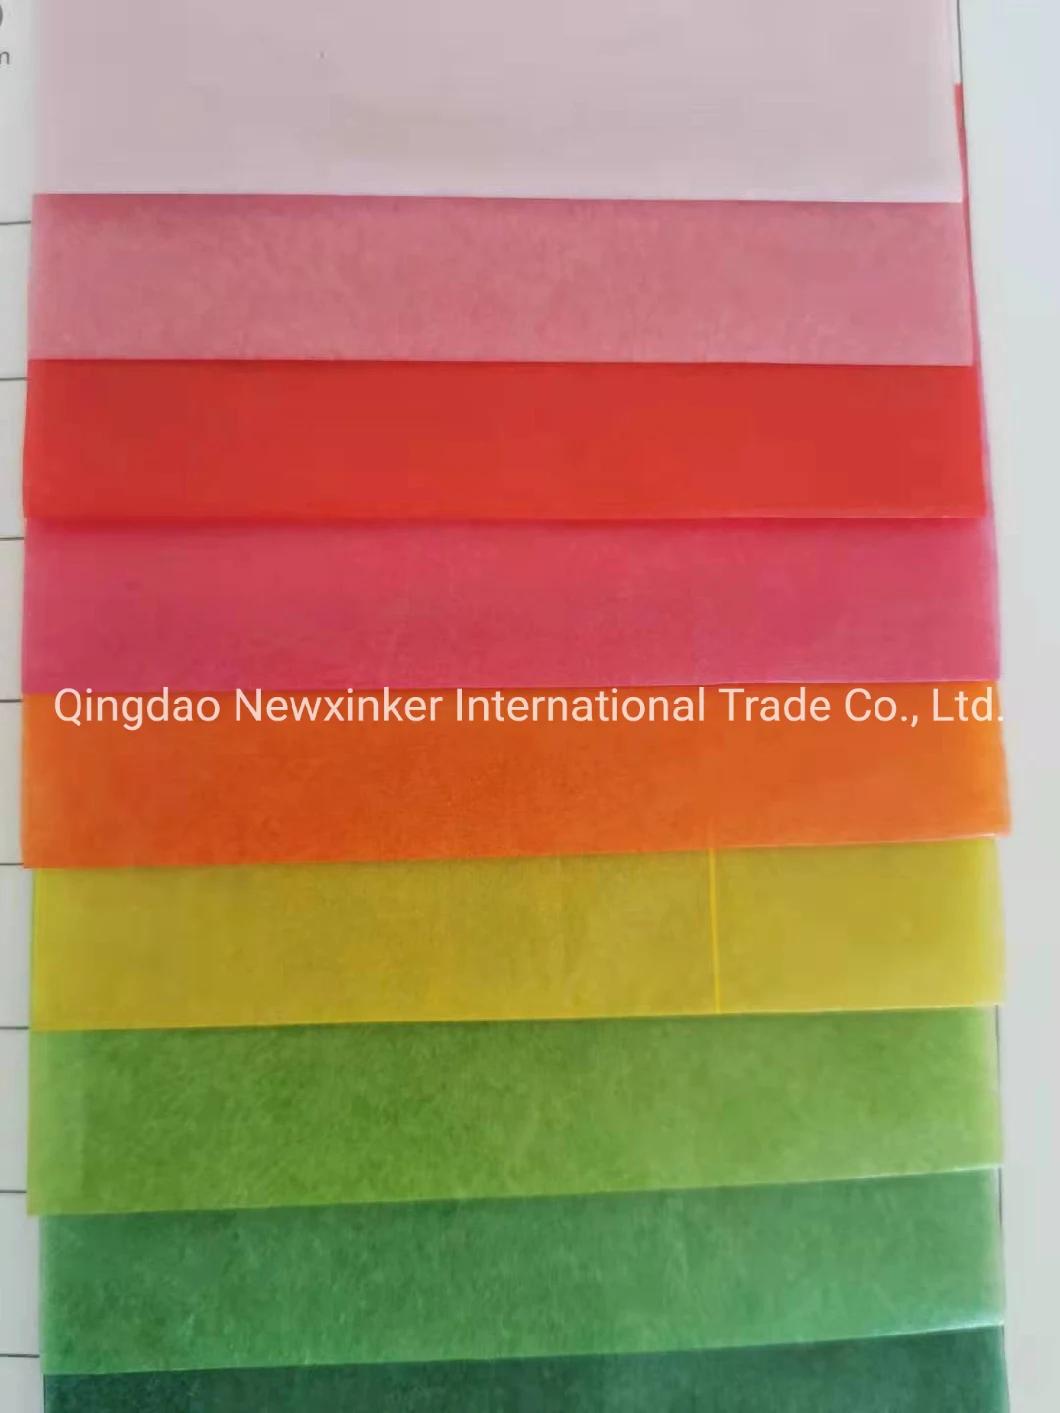 21-24GSM Colorful Glassine Waxed Paper